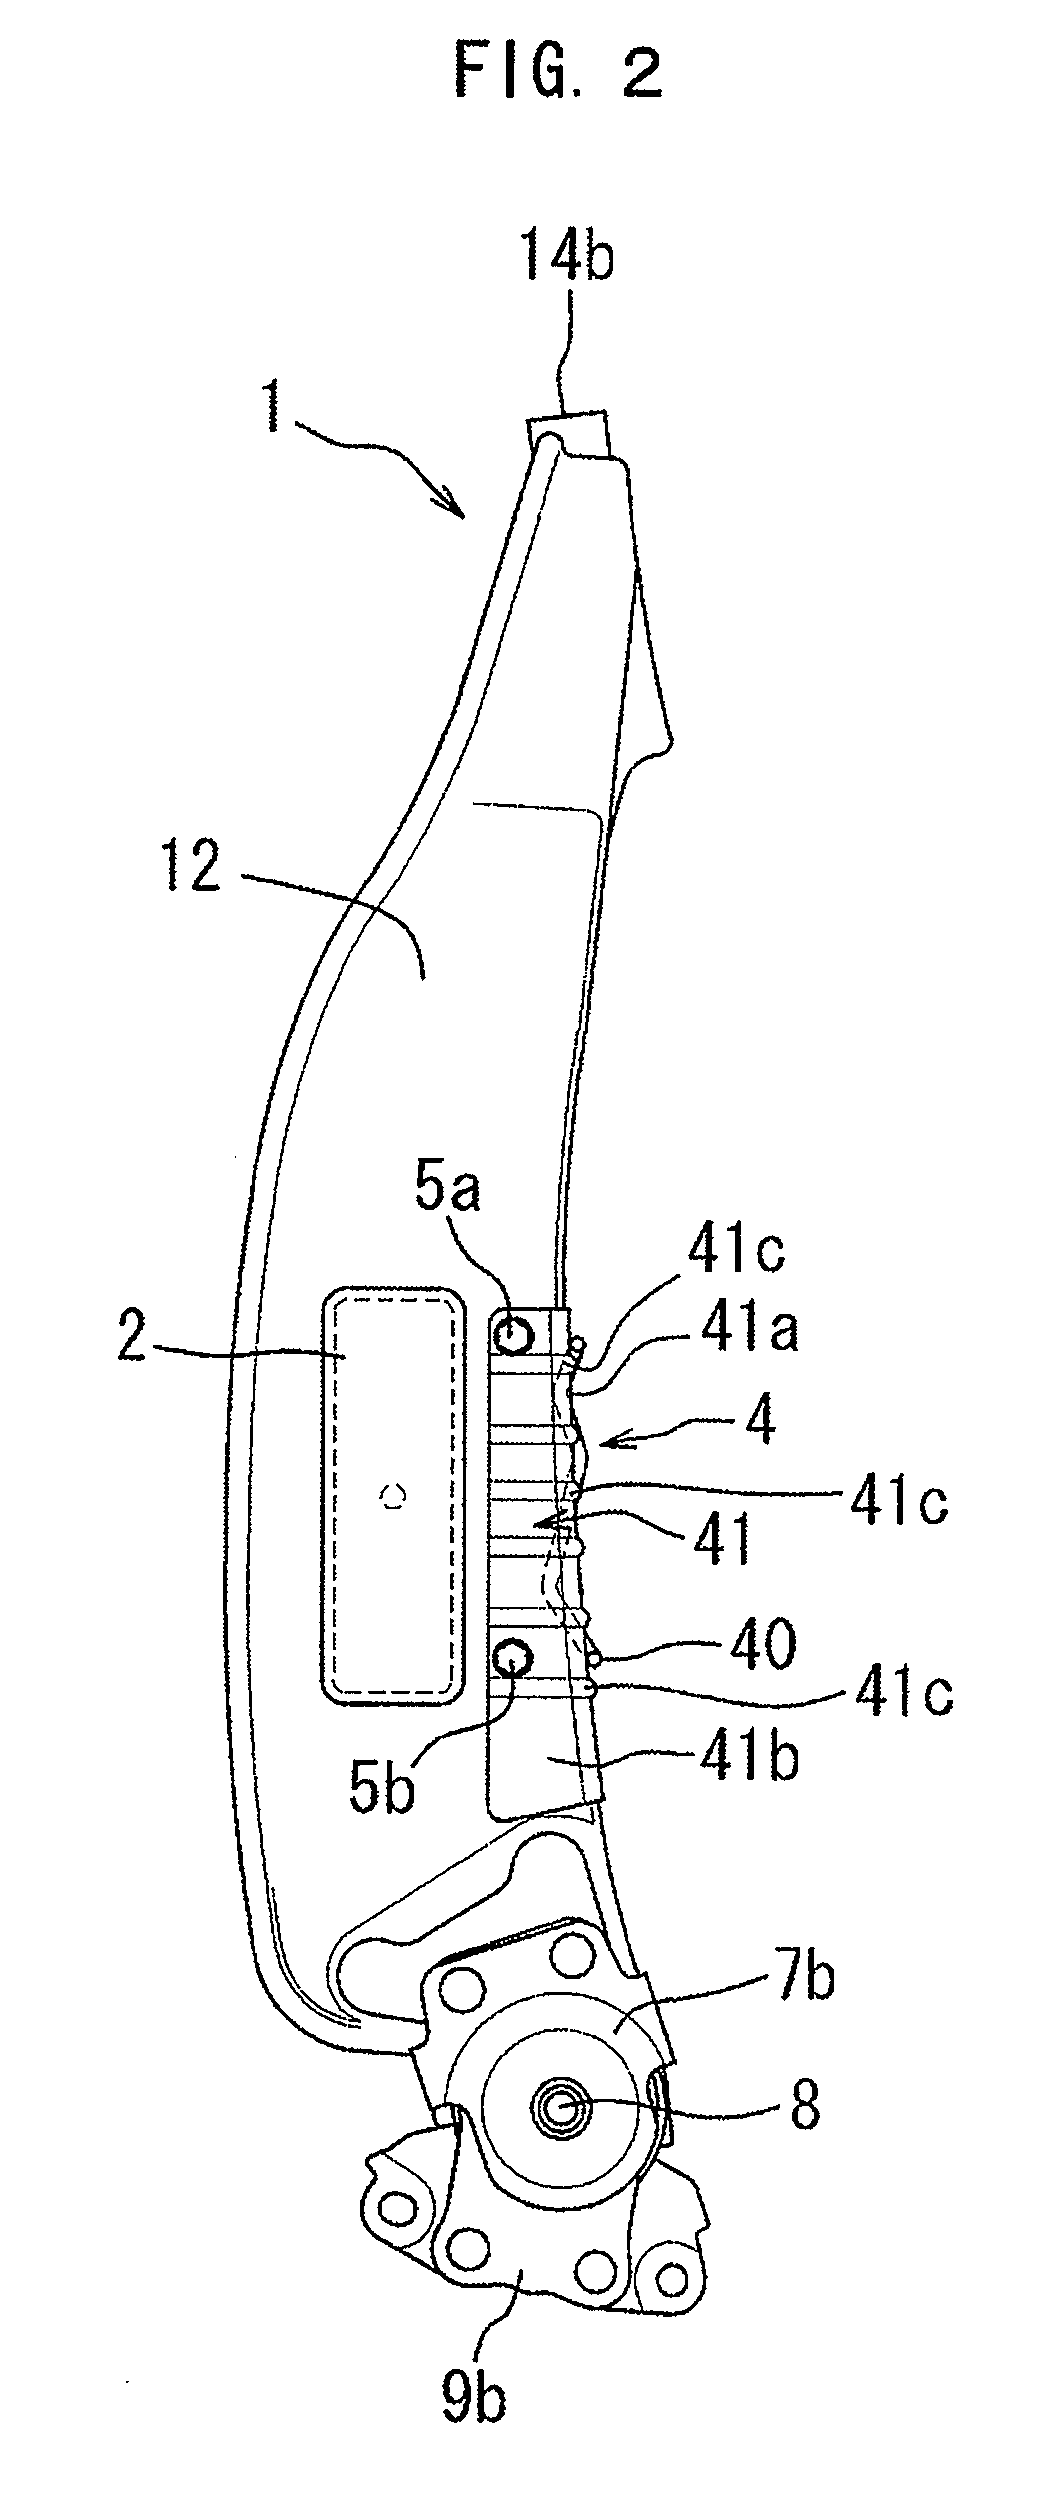 Vehicle seat having light alloy frame provided with airbag module